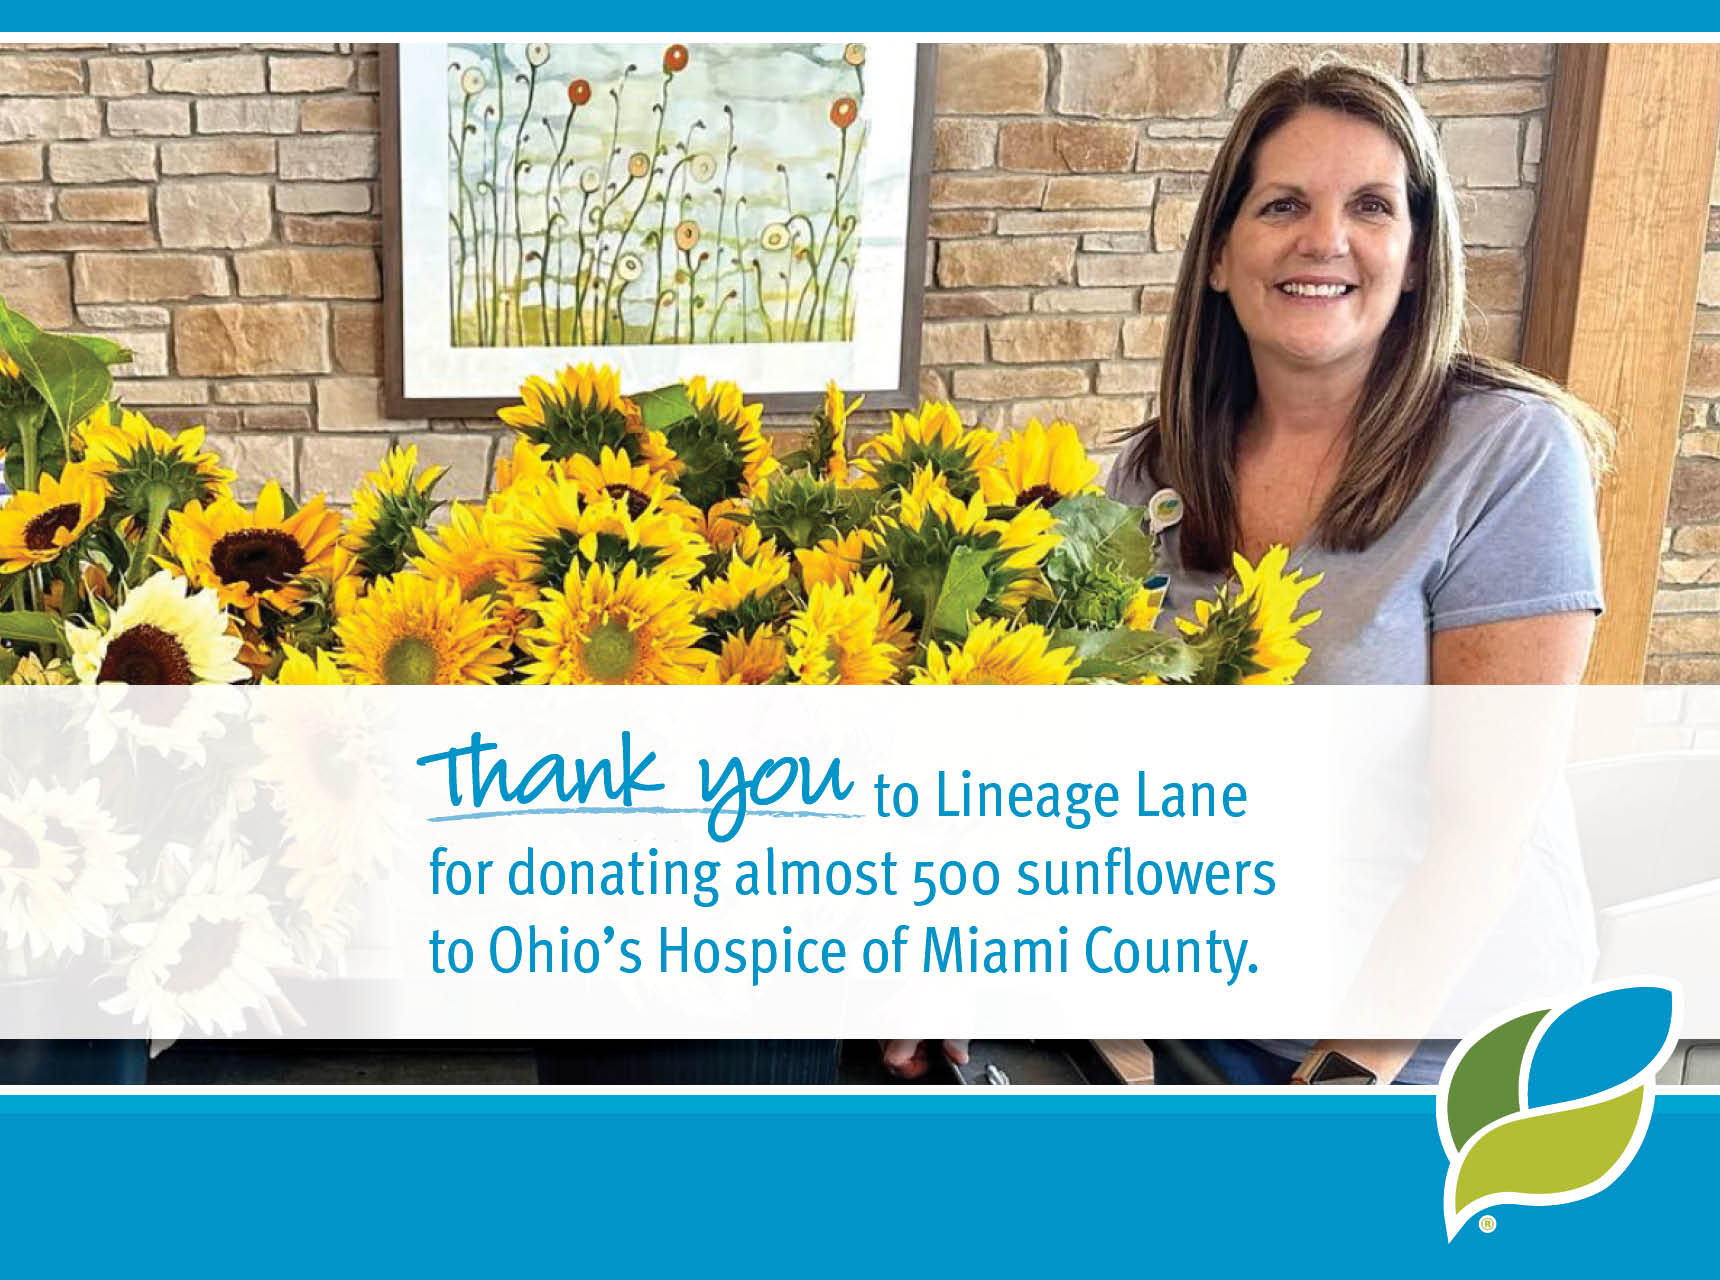 Thank you to Lineage Lane for donating almost 500 sunflowers to Ohio's Hospice of Miami County.